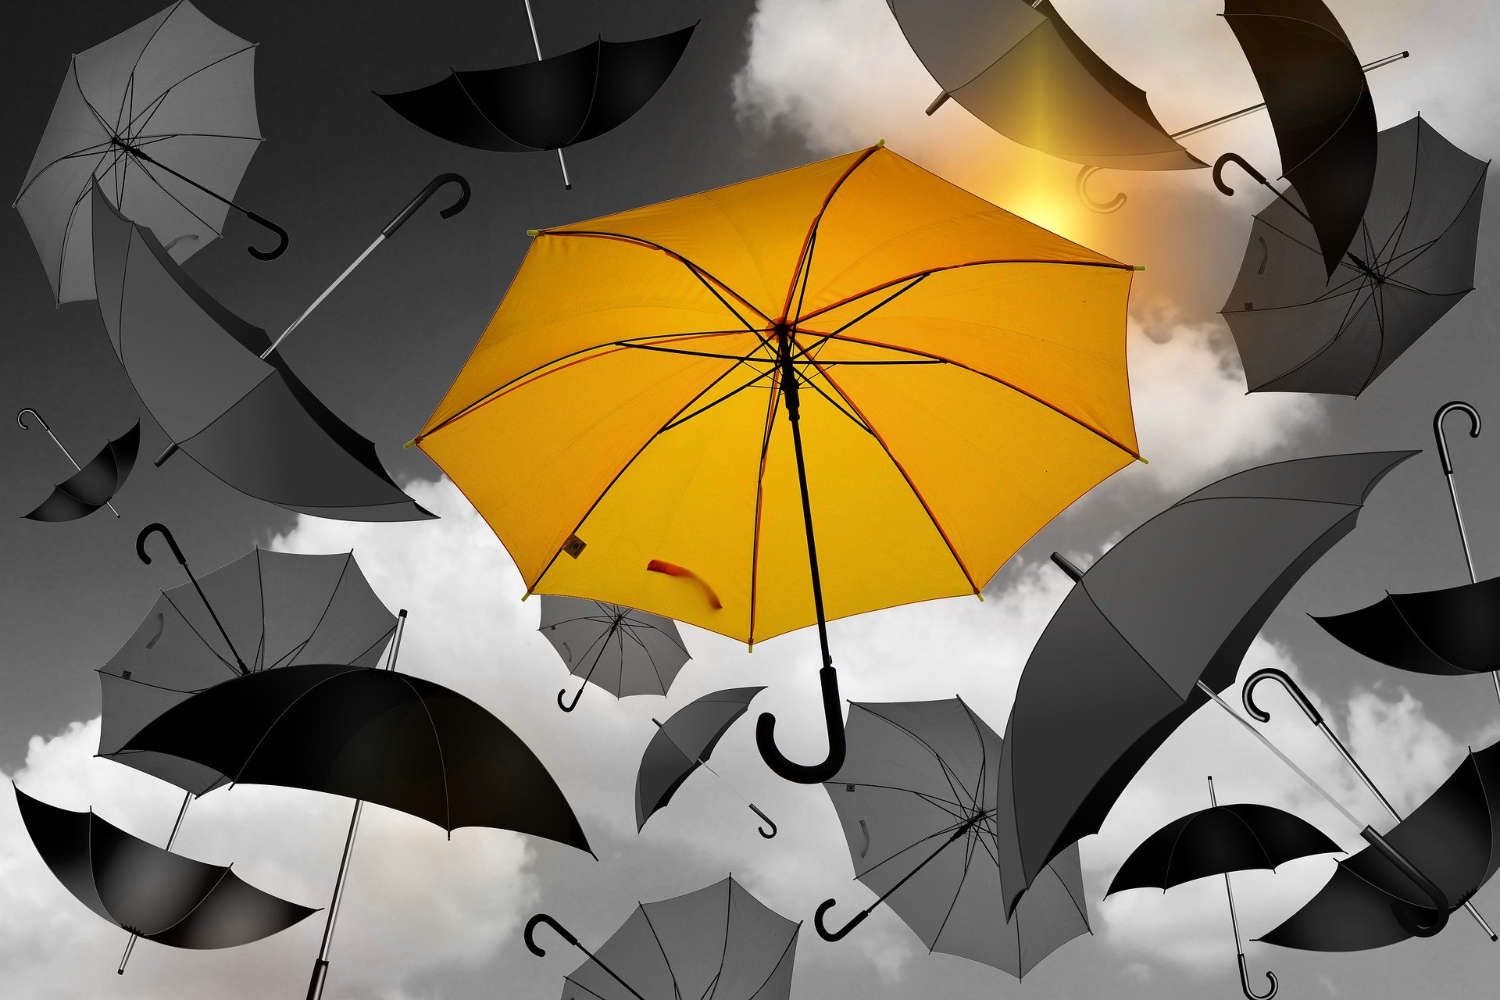 Umbrella Insurance – Is It Right For Me?